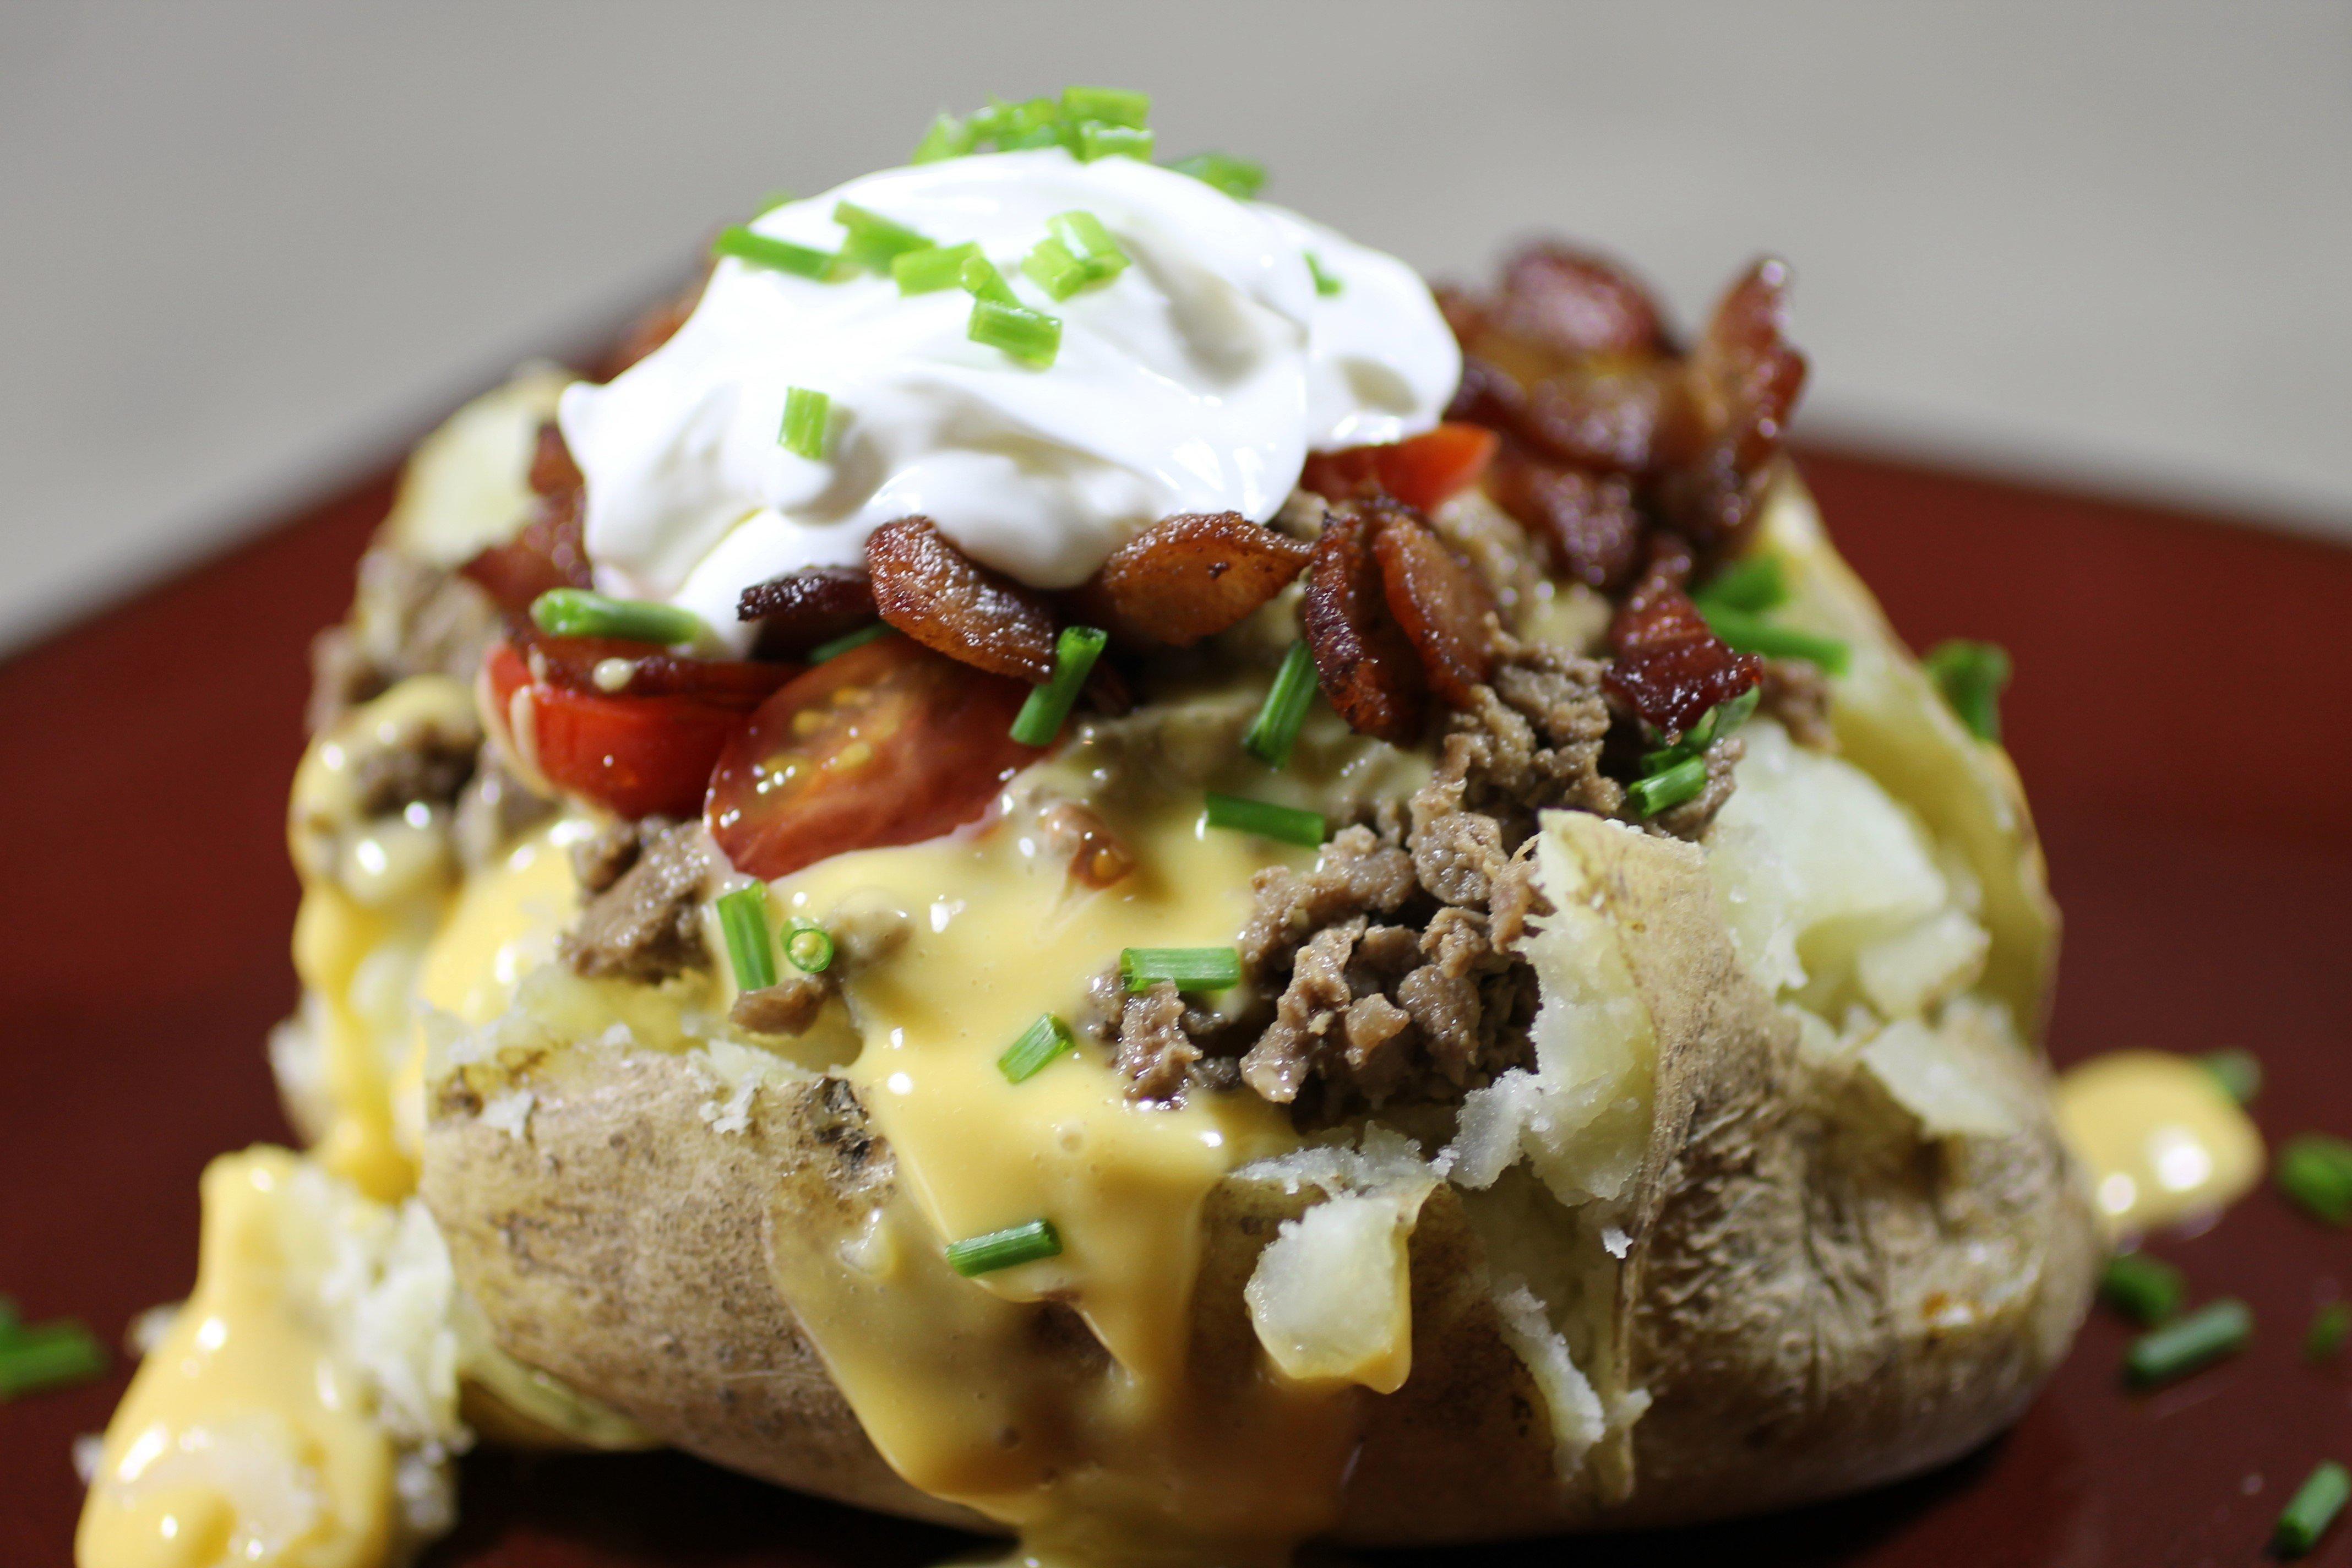 Ground venison, cheese sauce, bacon, and sour cream make up the All-American.